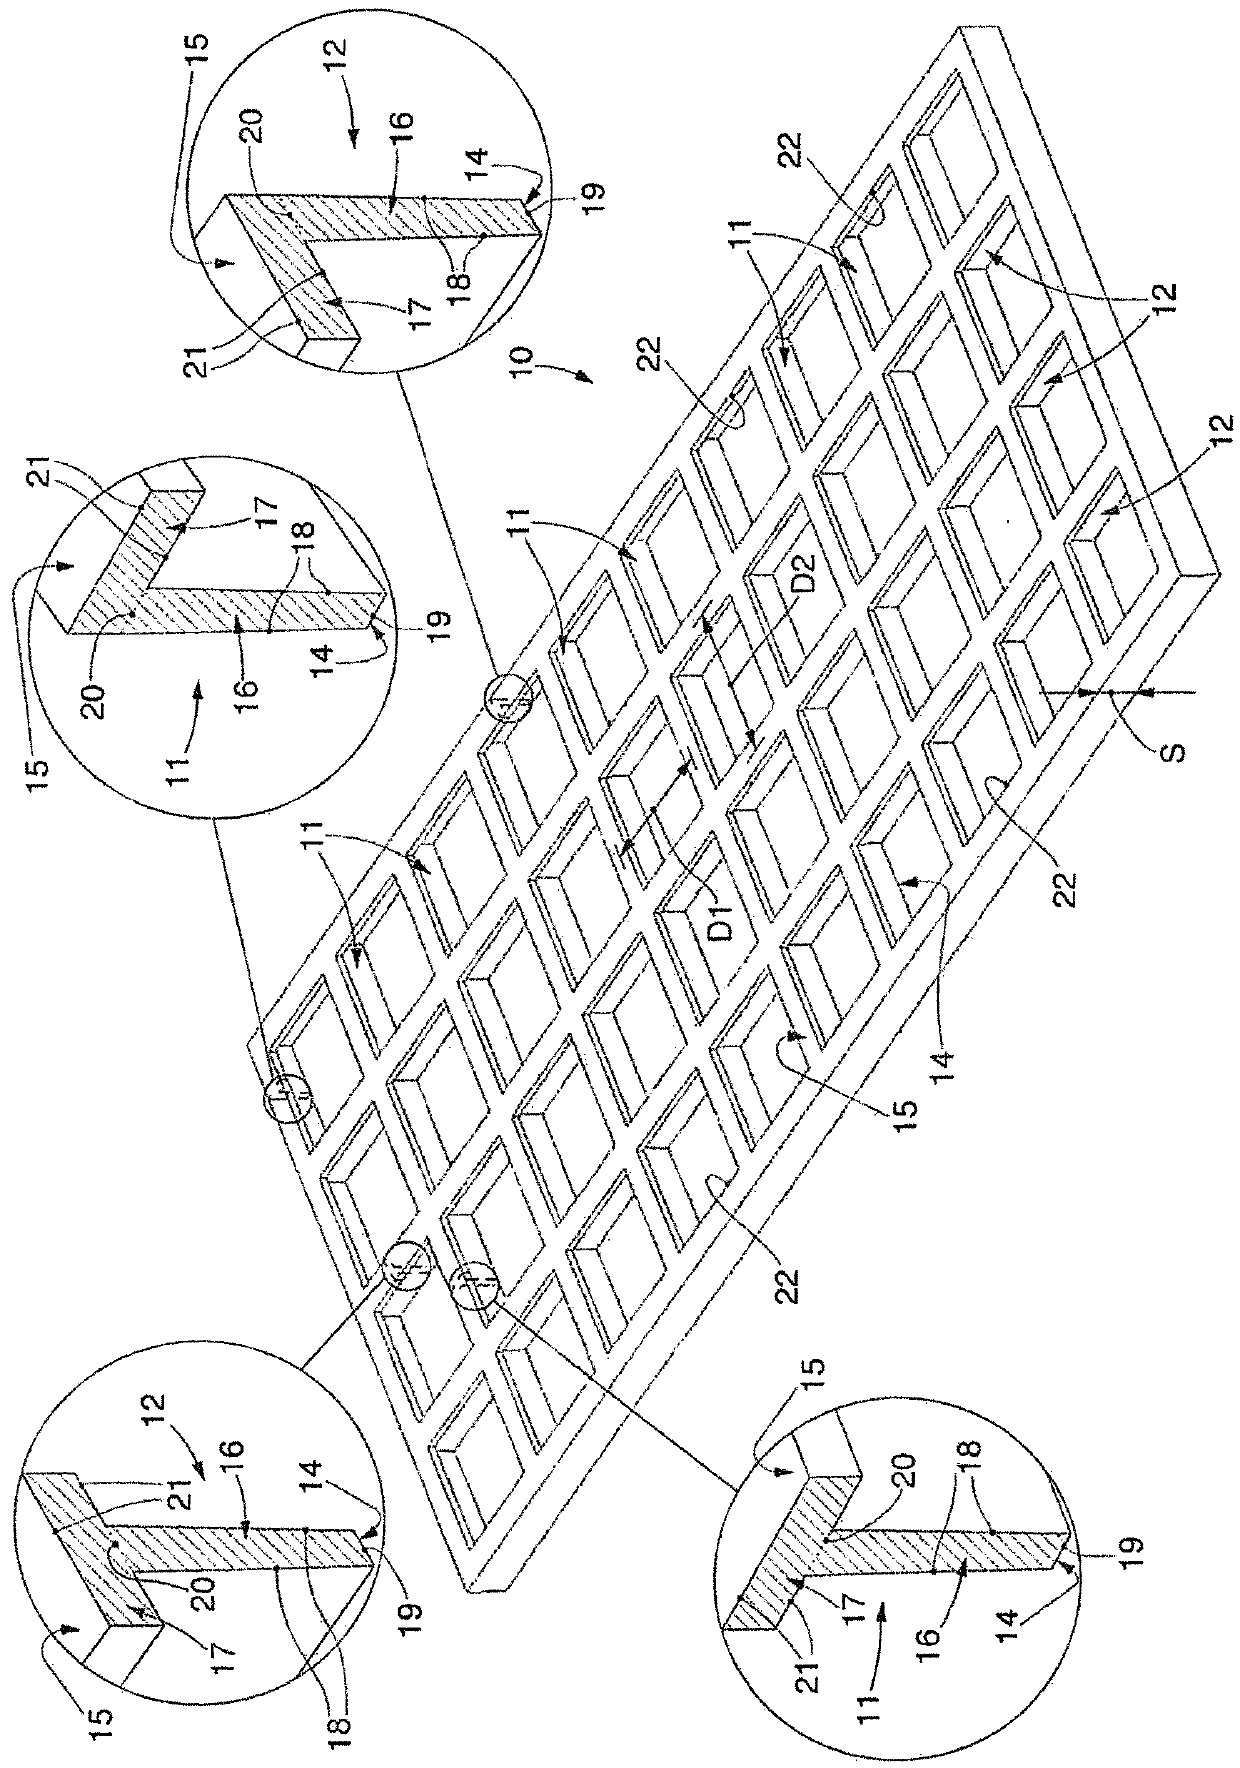 Compound structure made of composite material and method of production